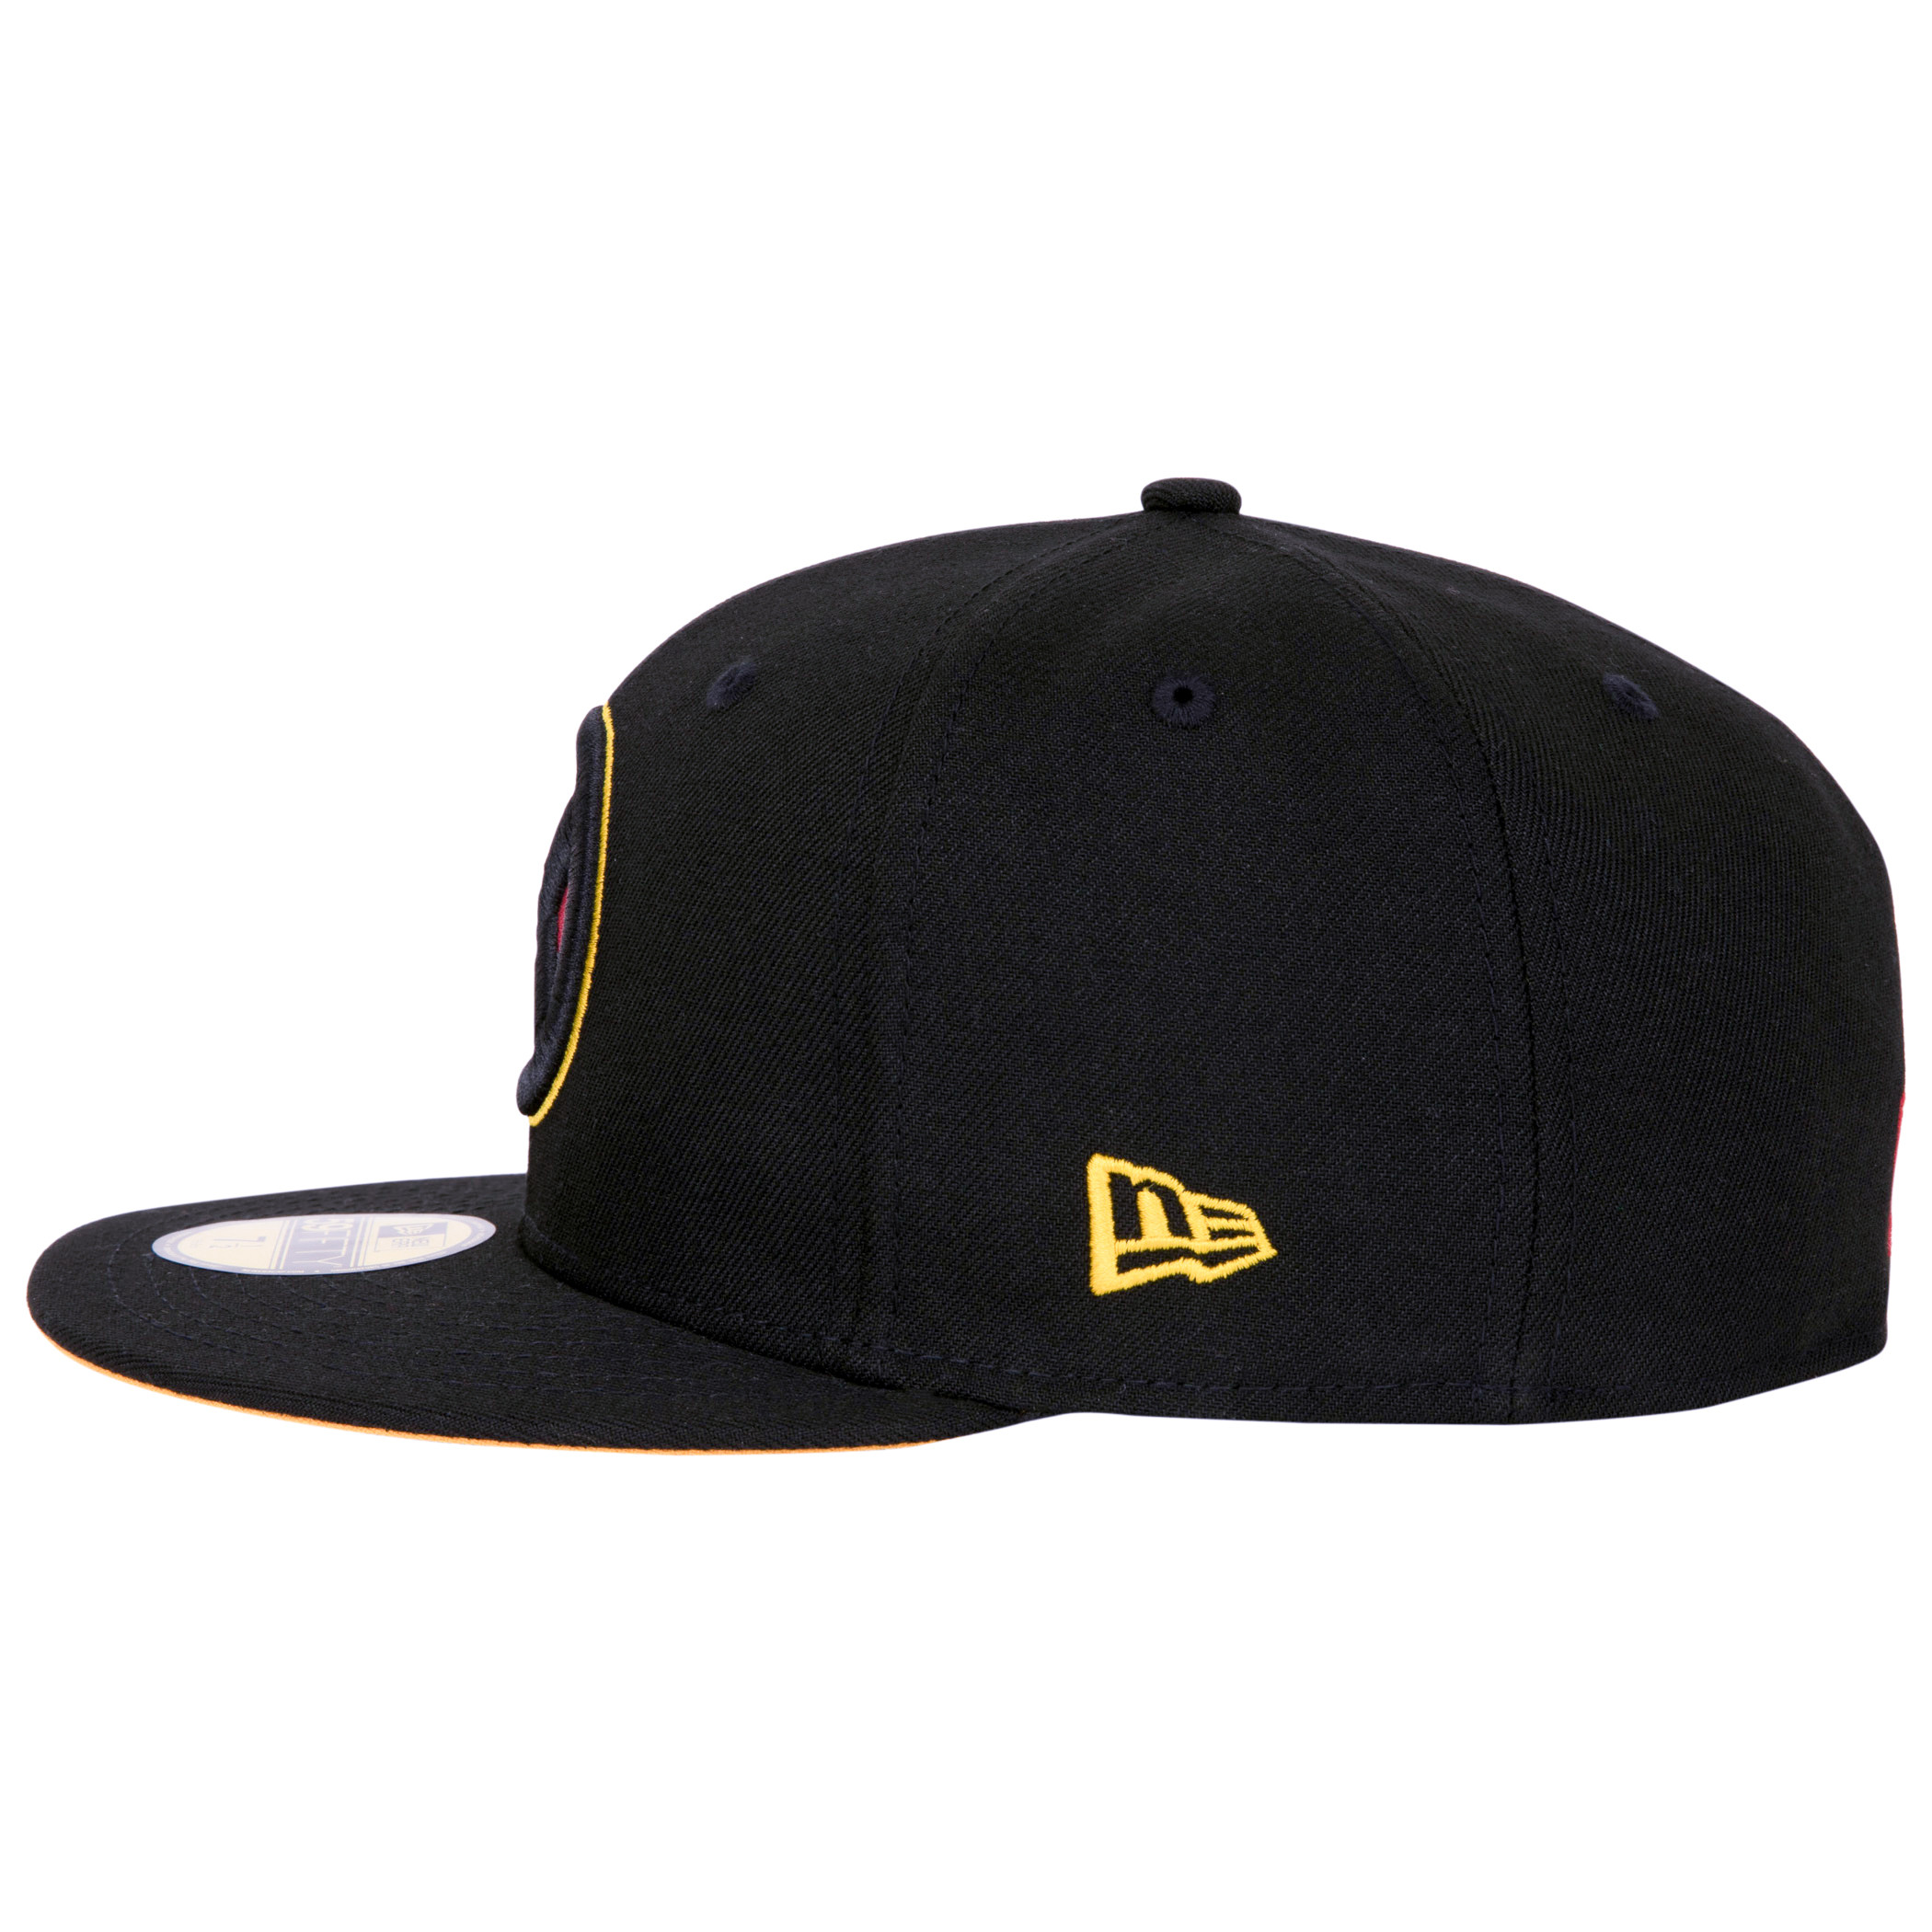 X-Men Logo Black Colorway New Era 59Fifty Fitted Hat